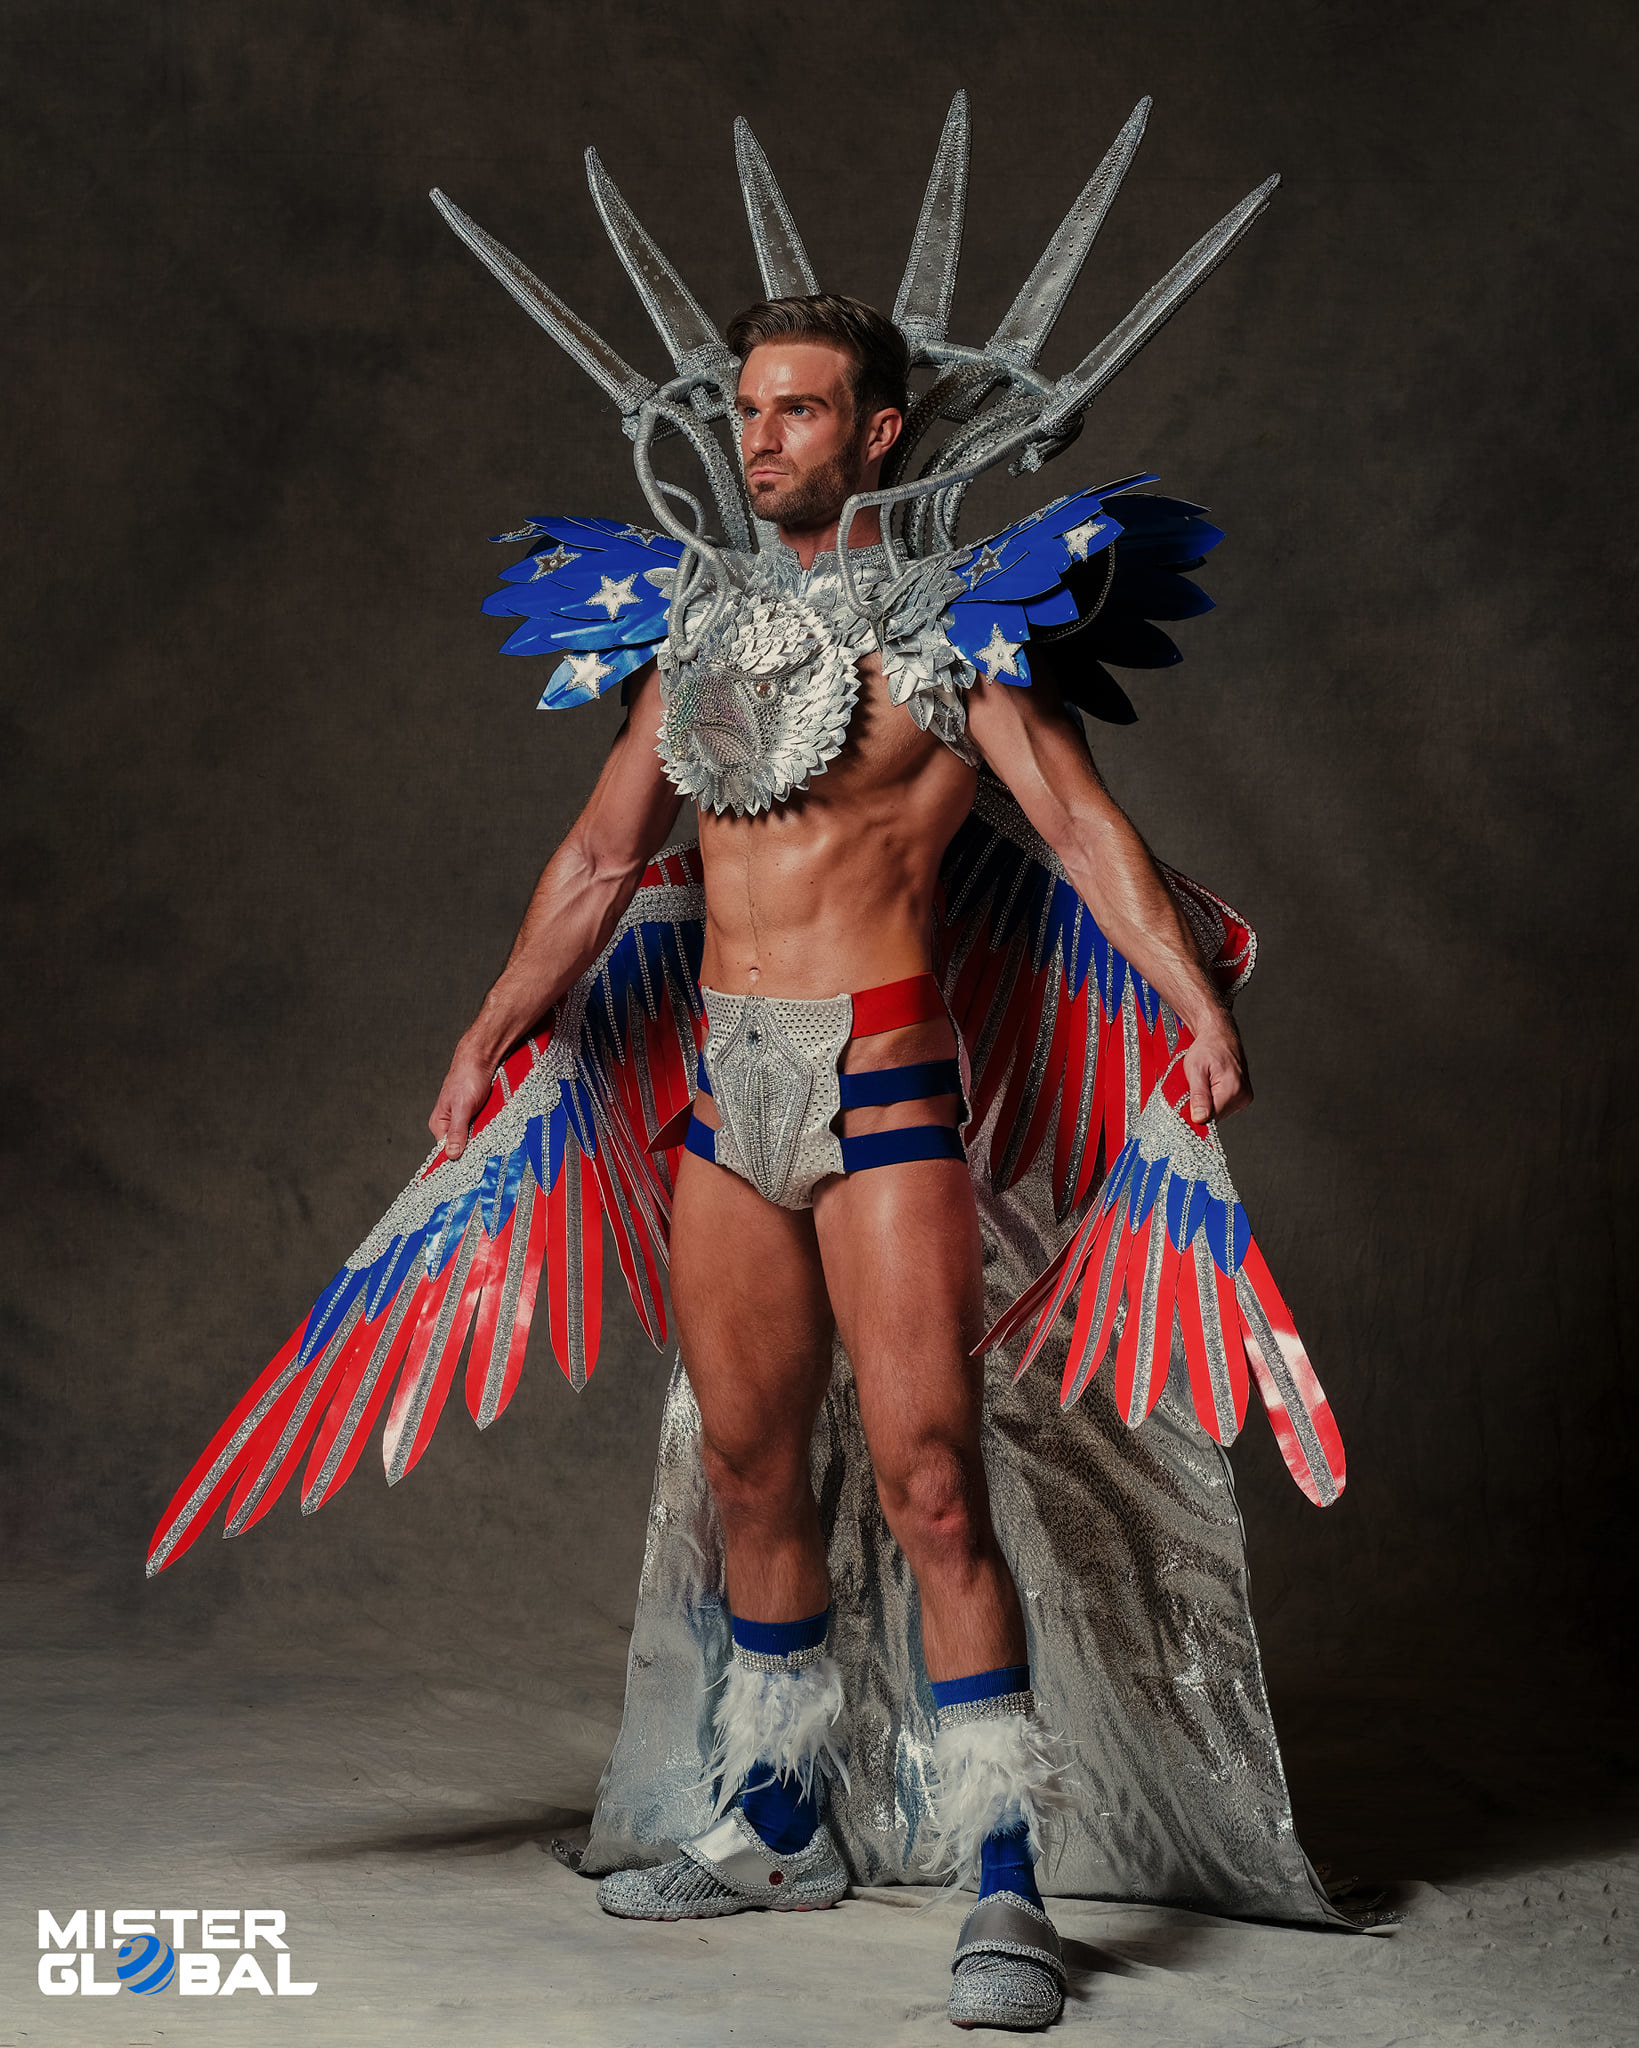 A bare-chested man wears an outfit with the colors of the US flag, including a winged shoulder piece with a wide, Statue of Liberty crown and three-strap loincloth